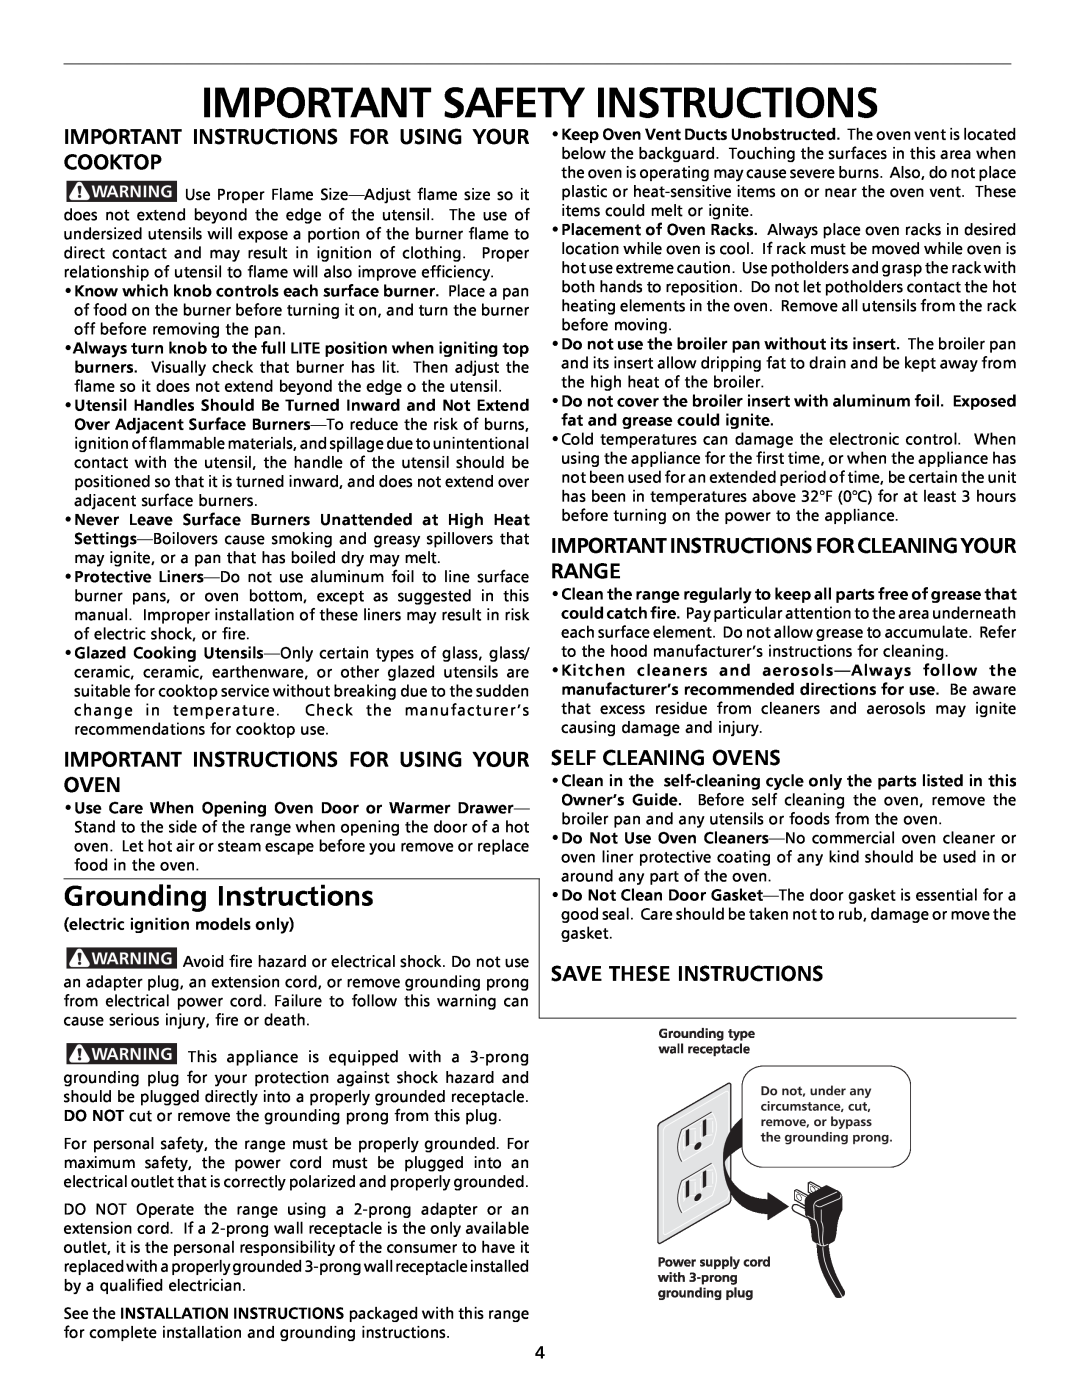 Tappan 316000191 Grounding Instructions, Important Safety Instructions, Important Instructions For Using Your Cooktop 